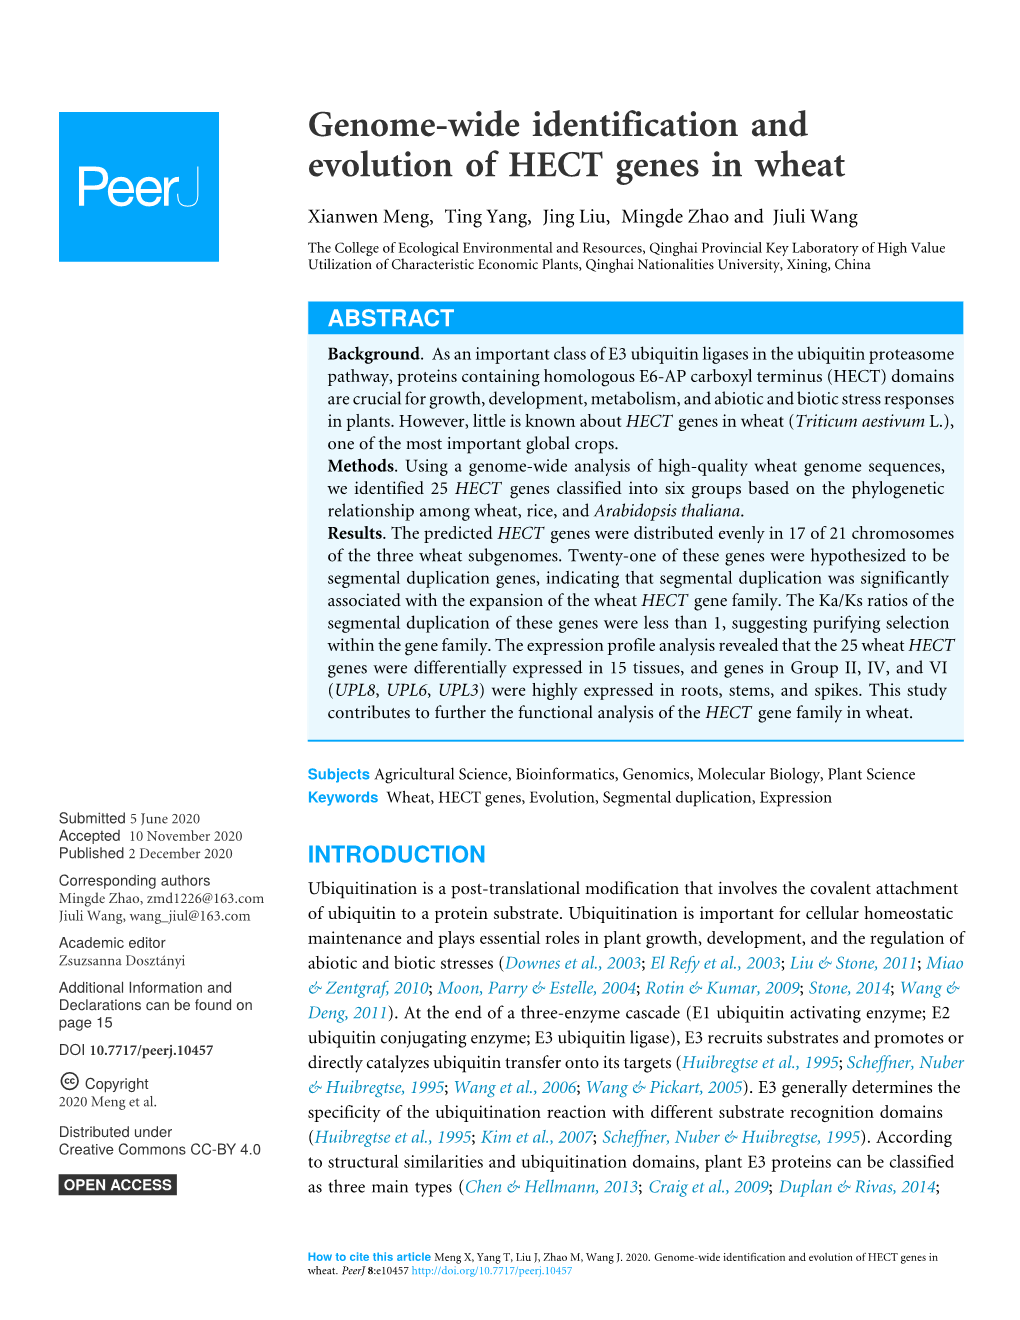 Genome-Wide Identification and Evolution of HECT Genes in Wheat